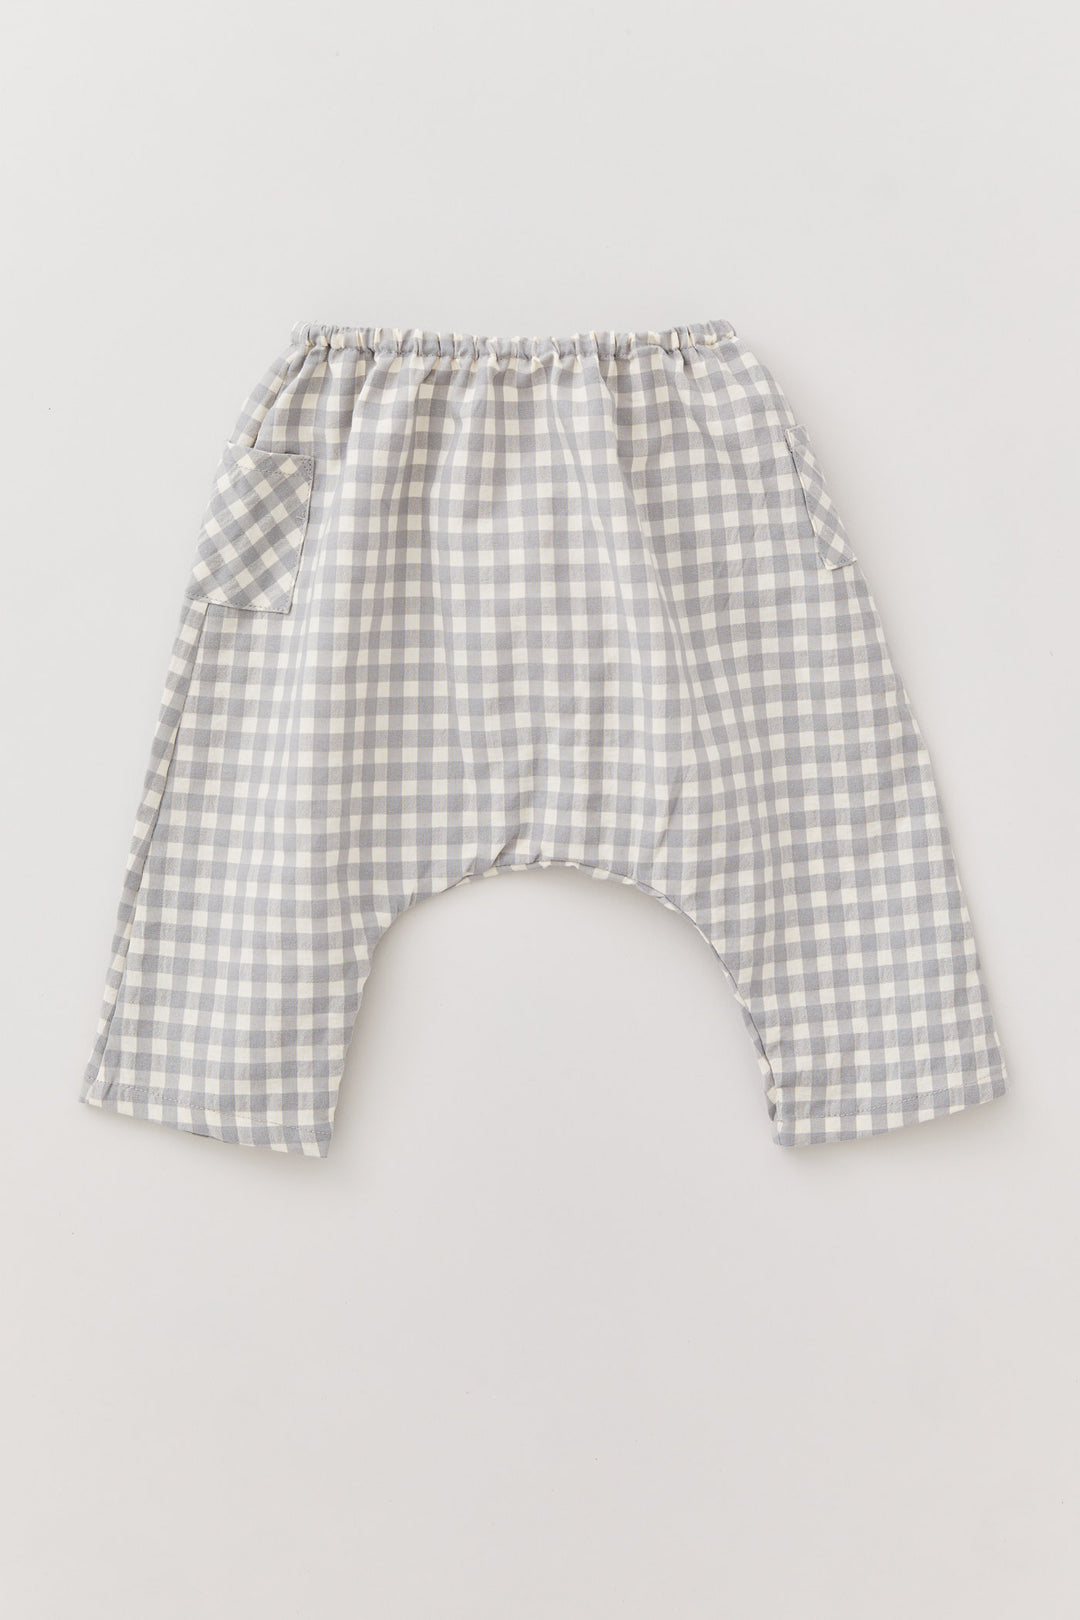 Baby Apple Trousers Cream Grey Check - Designed by Ingrid Lewis - Strawberries & Cream